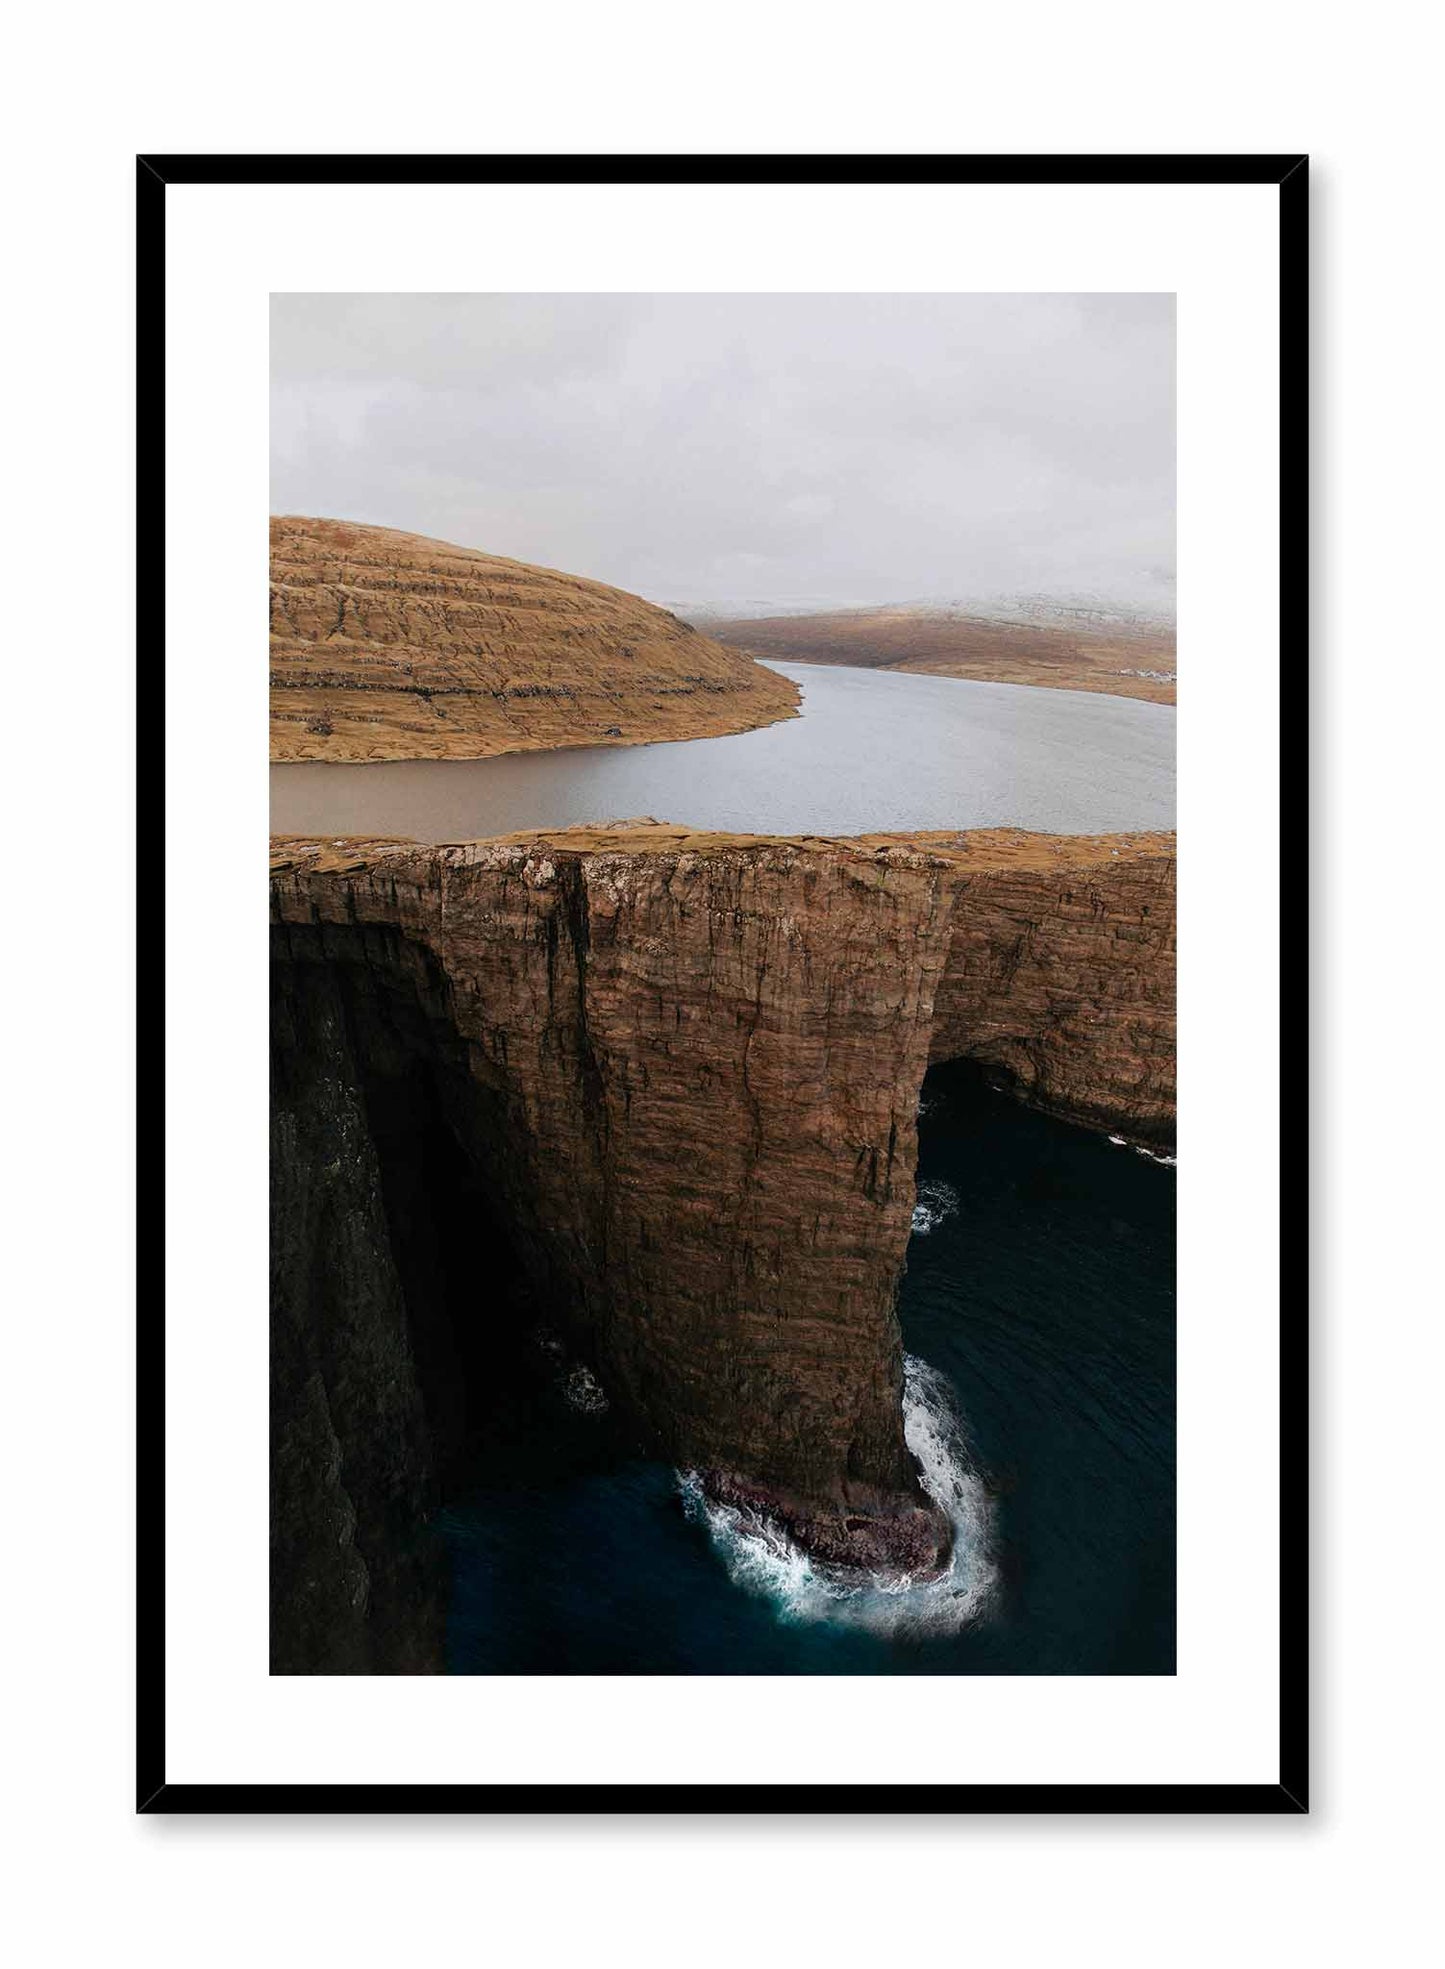 Serene Precipice' is a landscape photography poster by Opposite Wall of a tranquil lake overlooking the edge of a tall cliff in the Faroe Islands.